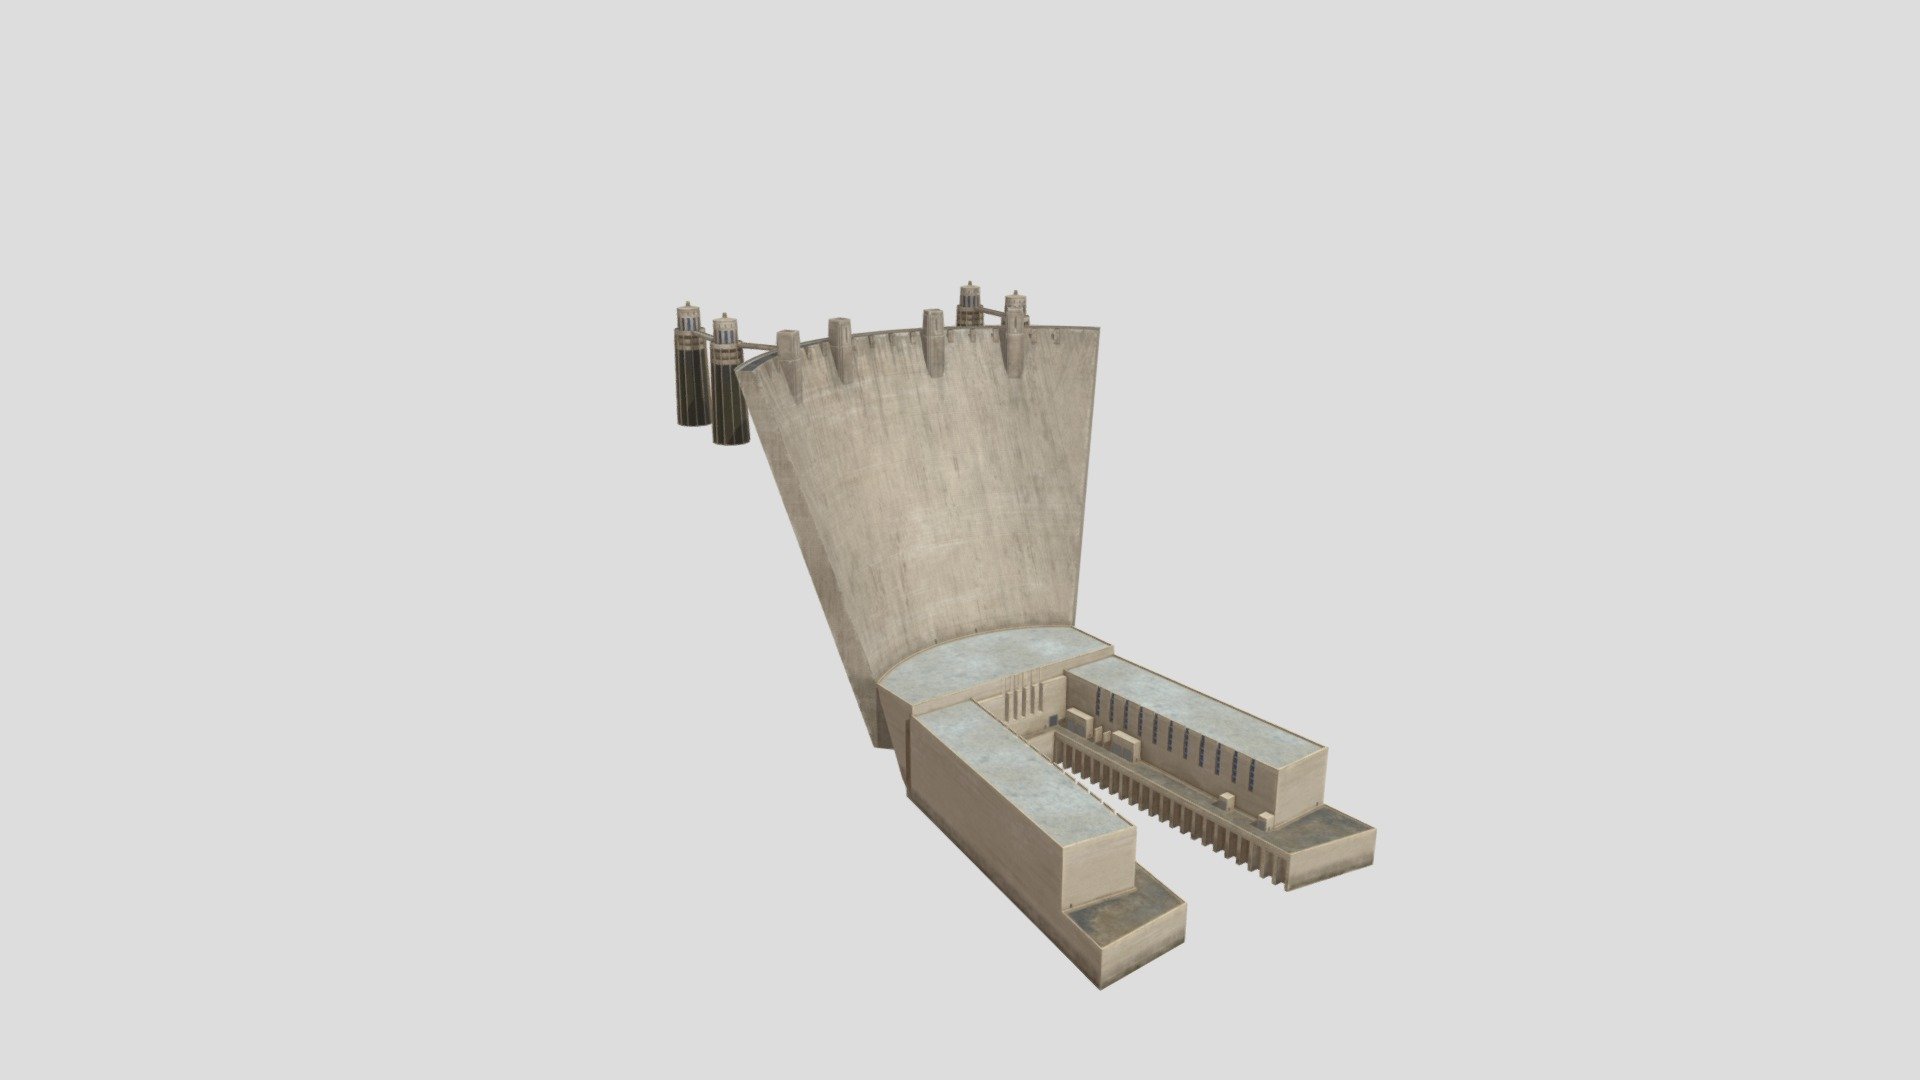 This High quality Hoover dam is perfect for any showcase or seen. With a low poly construction and both 8k and 4k texture sets, this model is viewable from almost any angle.

Whats included:
Hoover Dam Mesh
8K Texture Set
4K Texture Set - Hoover Dam with 8k and 4k Textures Low-poly - Buy Royalty Free 3D model by Desertsage 3d model